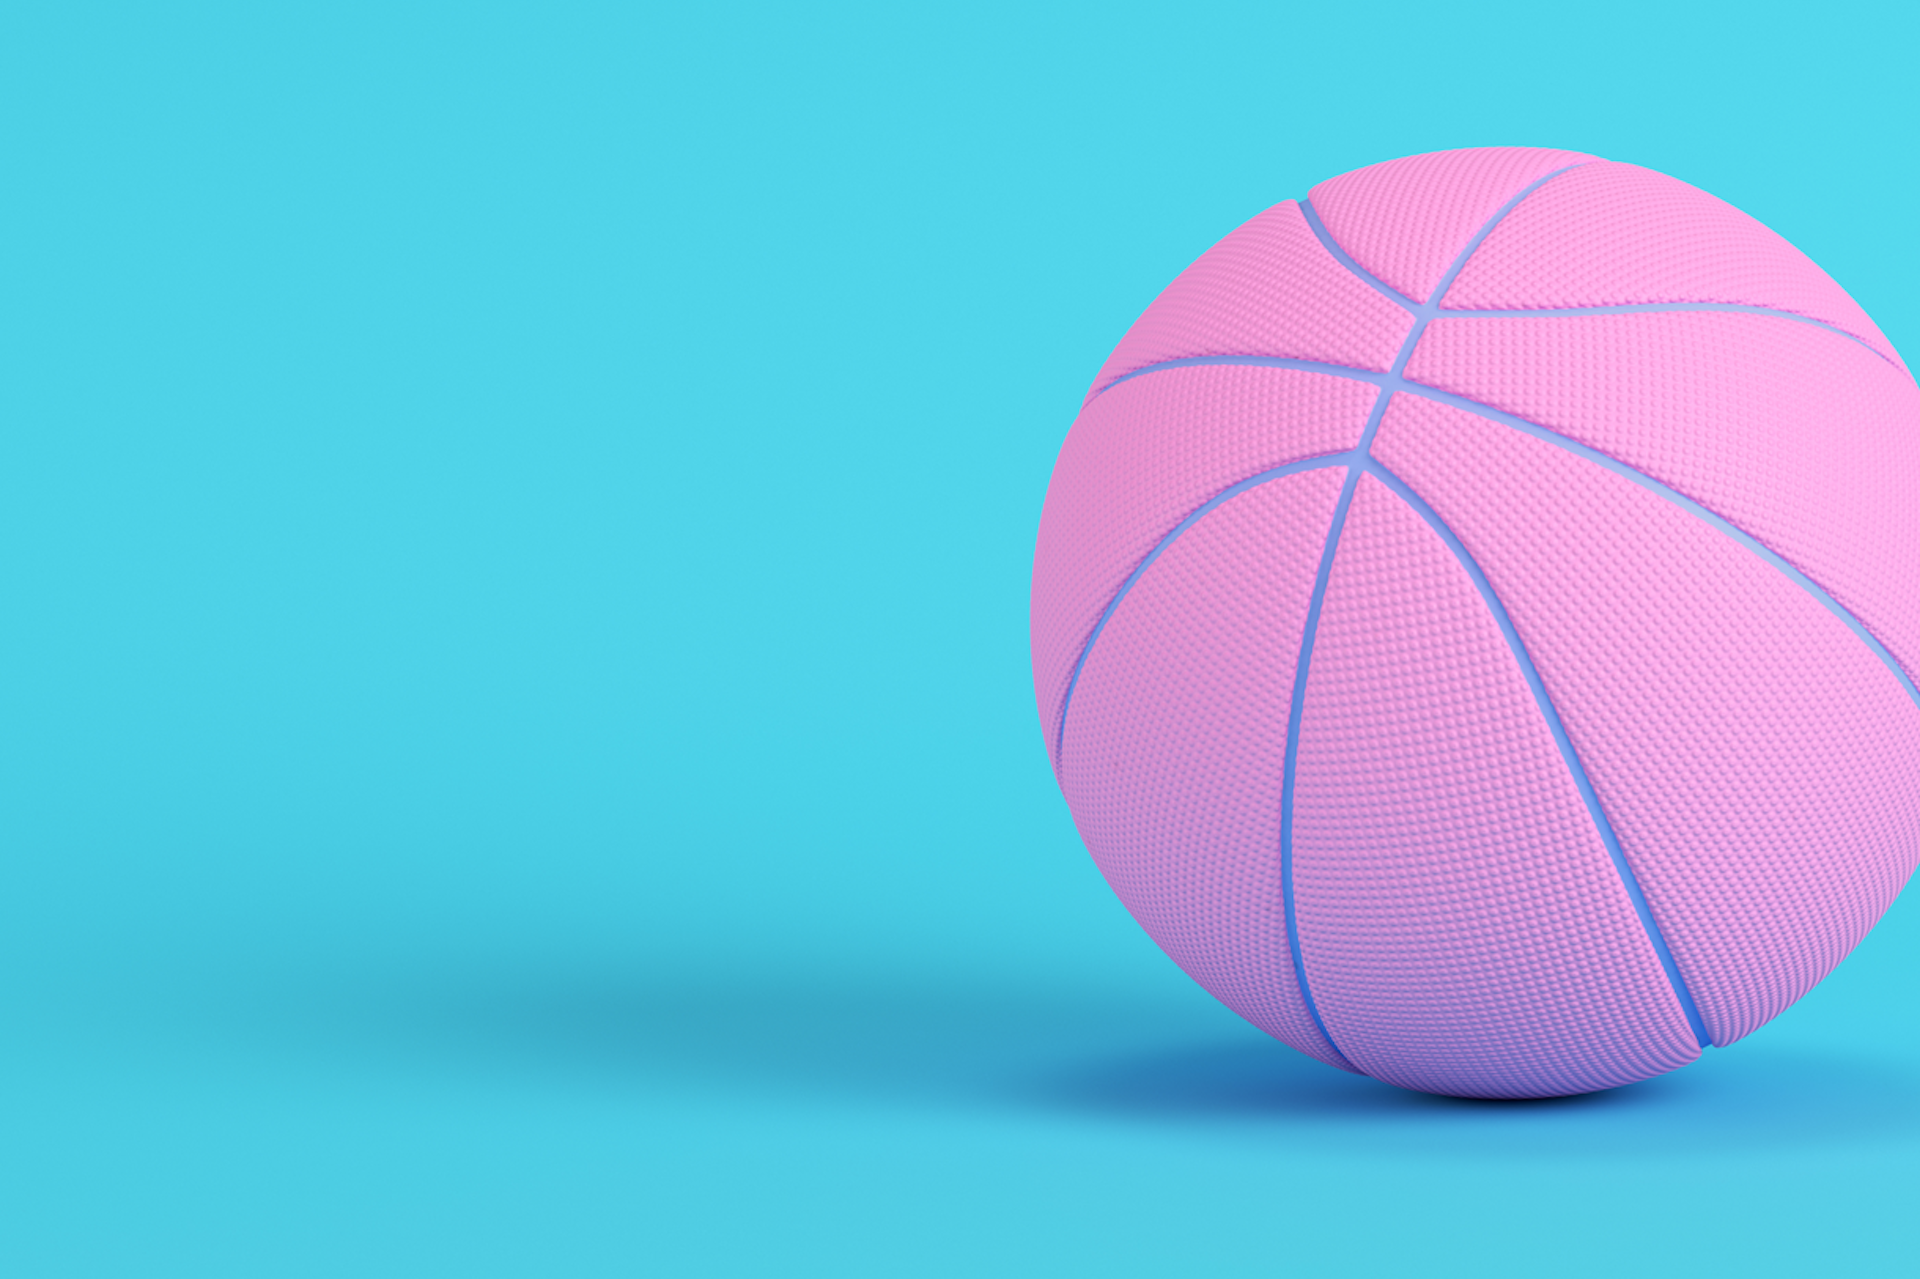 A pink basketball against a blue background for a blog about social listening and March Madness.